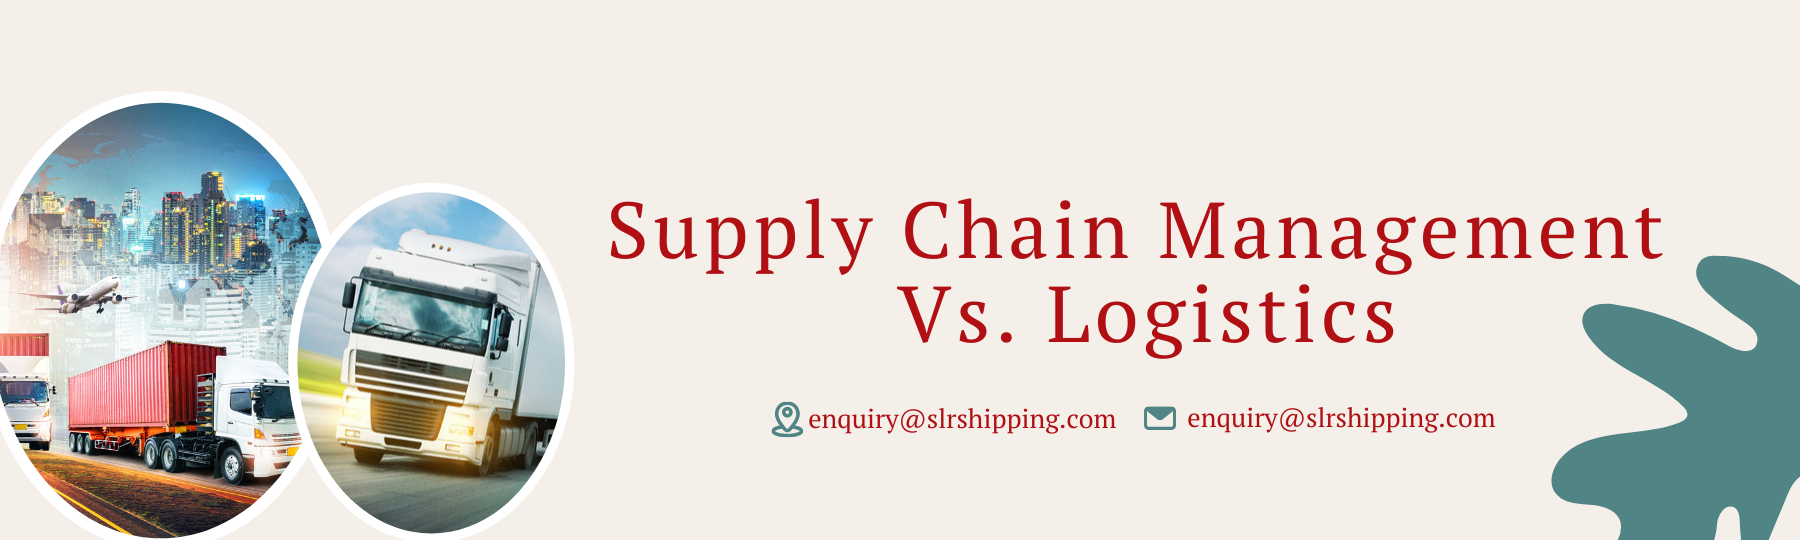 Major Differences Between Supply Chain Management and Logistics